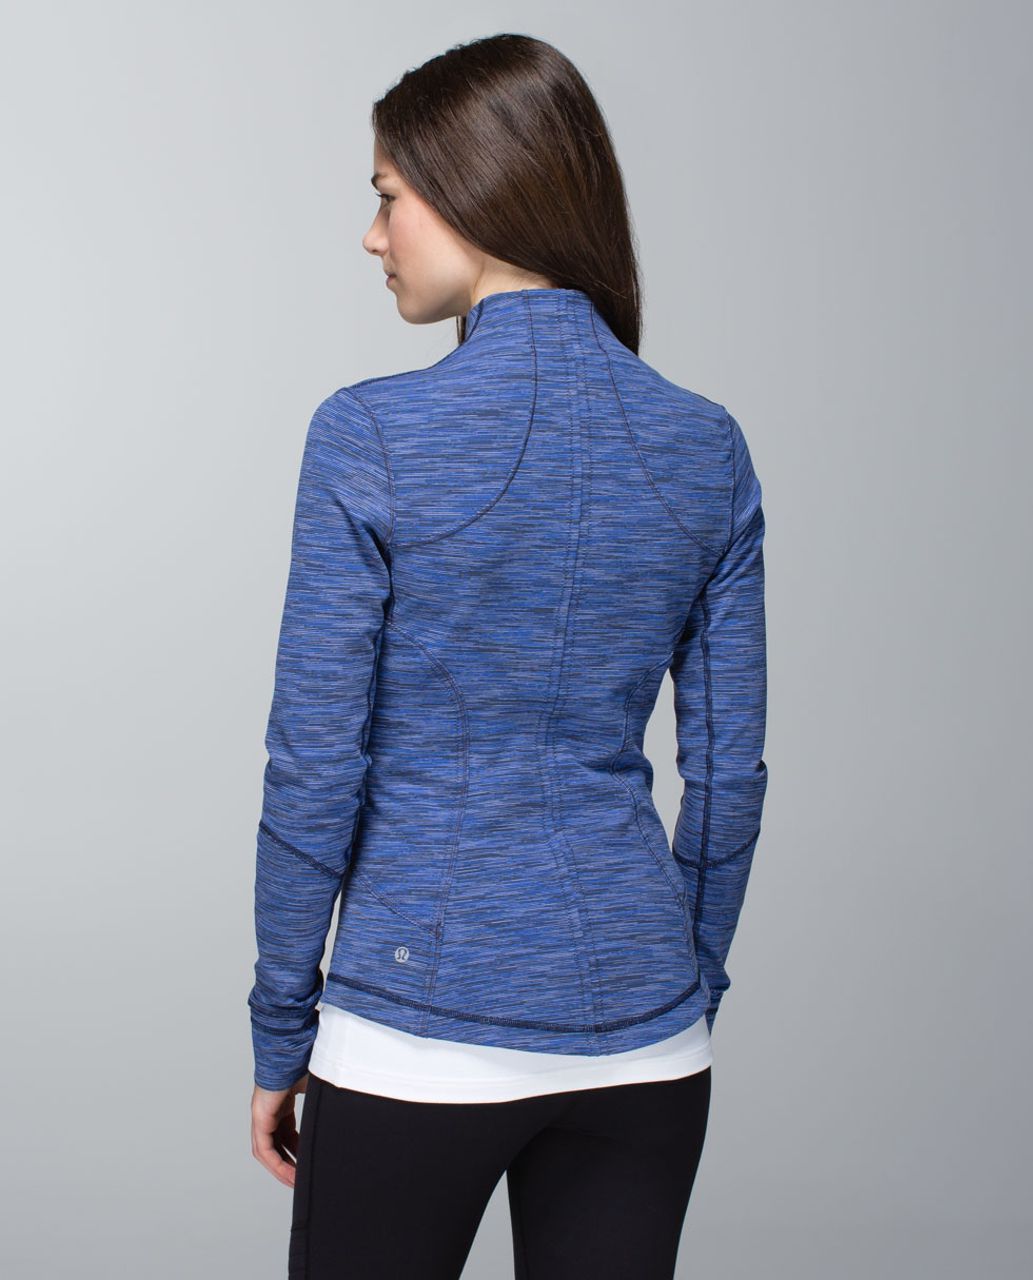 Lululemon Forme Jacket *Cuffins - Wee Are From Space Cadet Blue